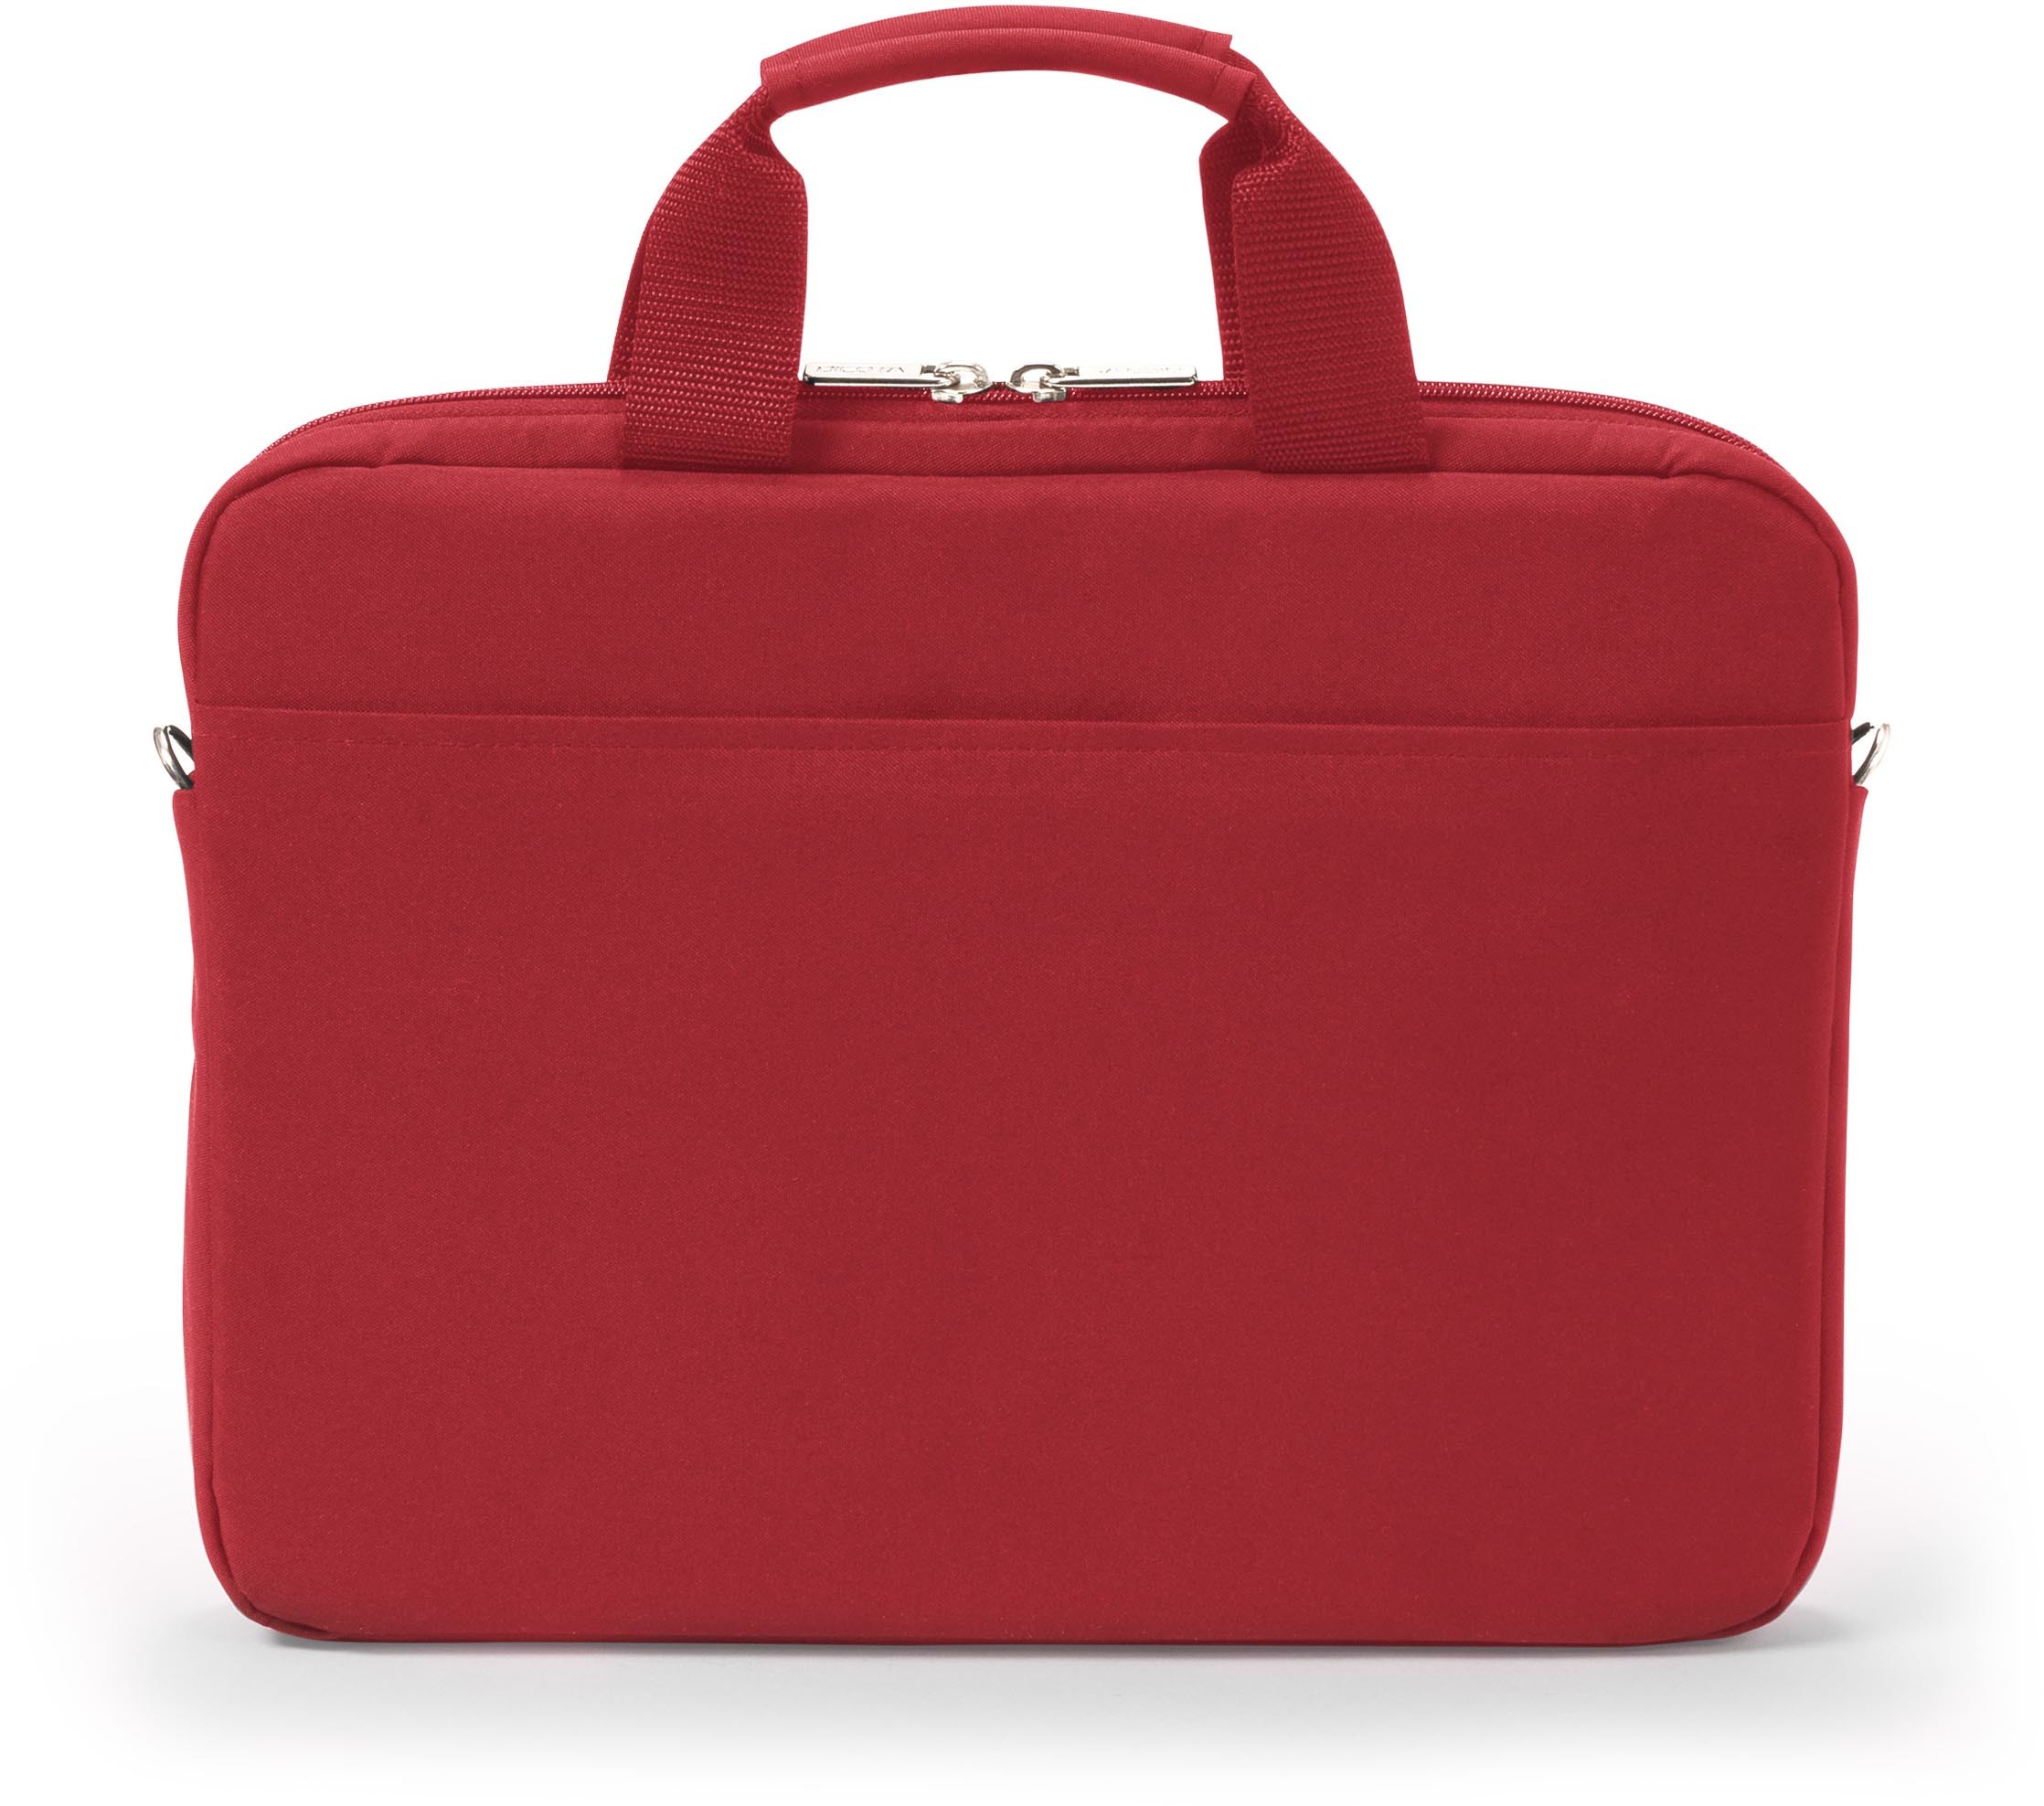 DICOTA Eco Slim Case BASE red D31306-RPET for Unviversal 13-14.1